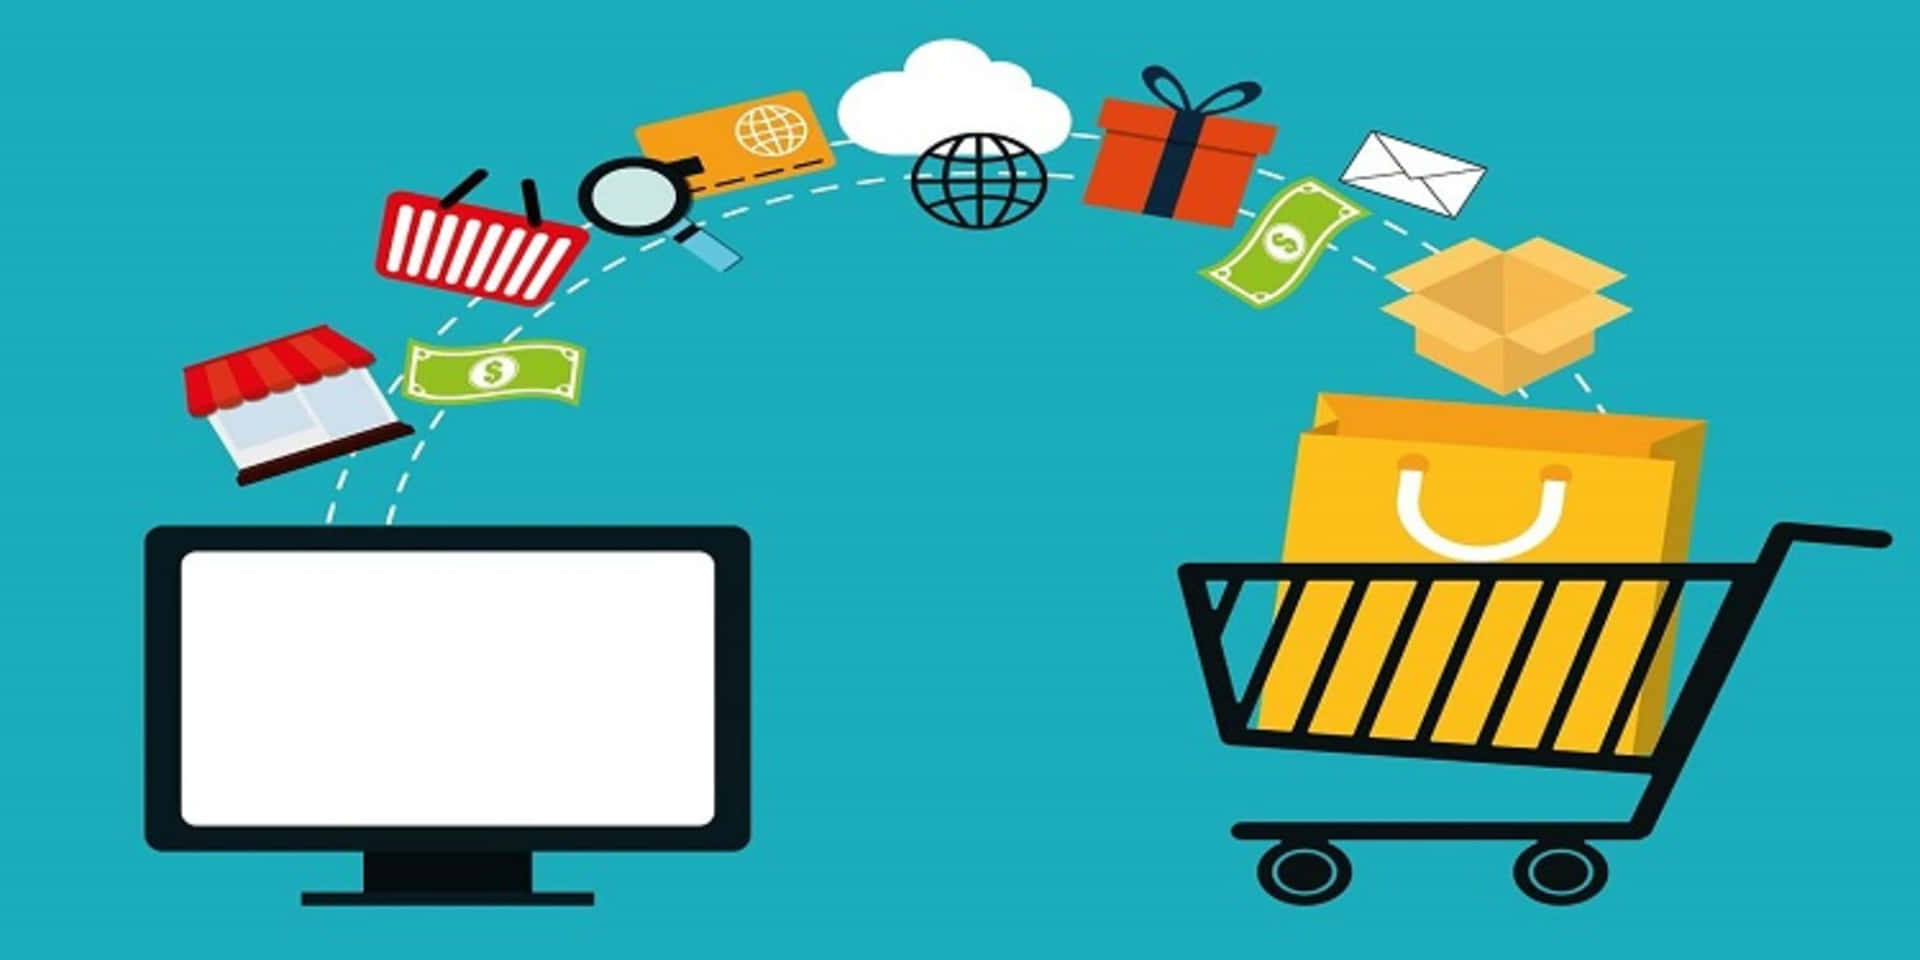 Ecommerce Marketing - What Is It?